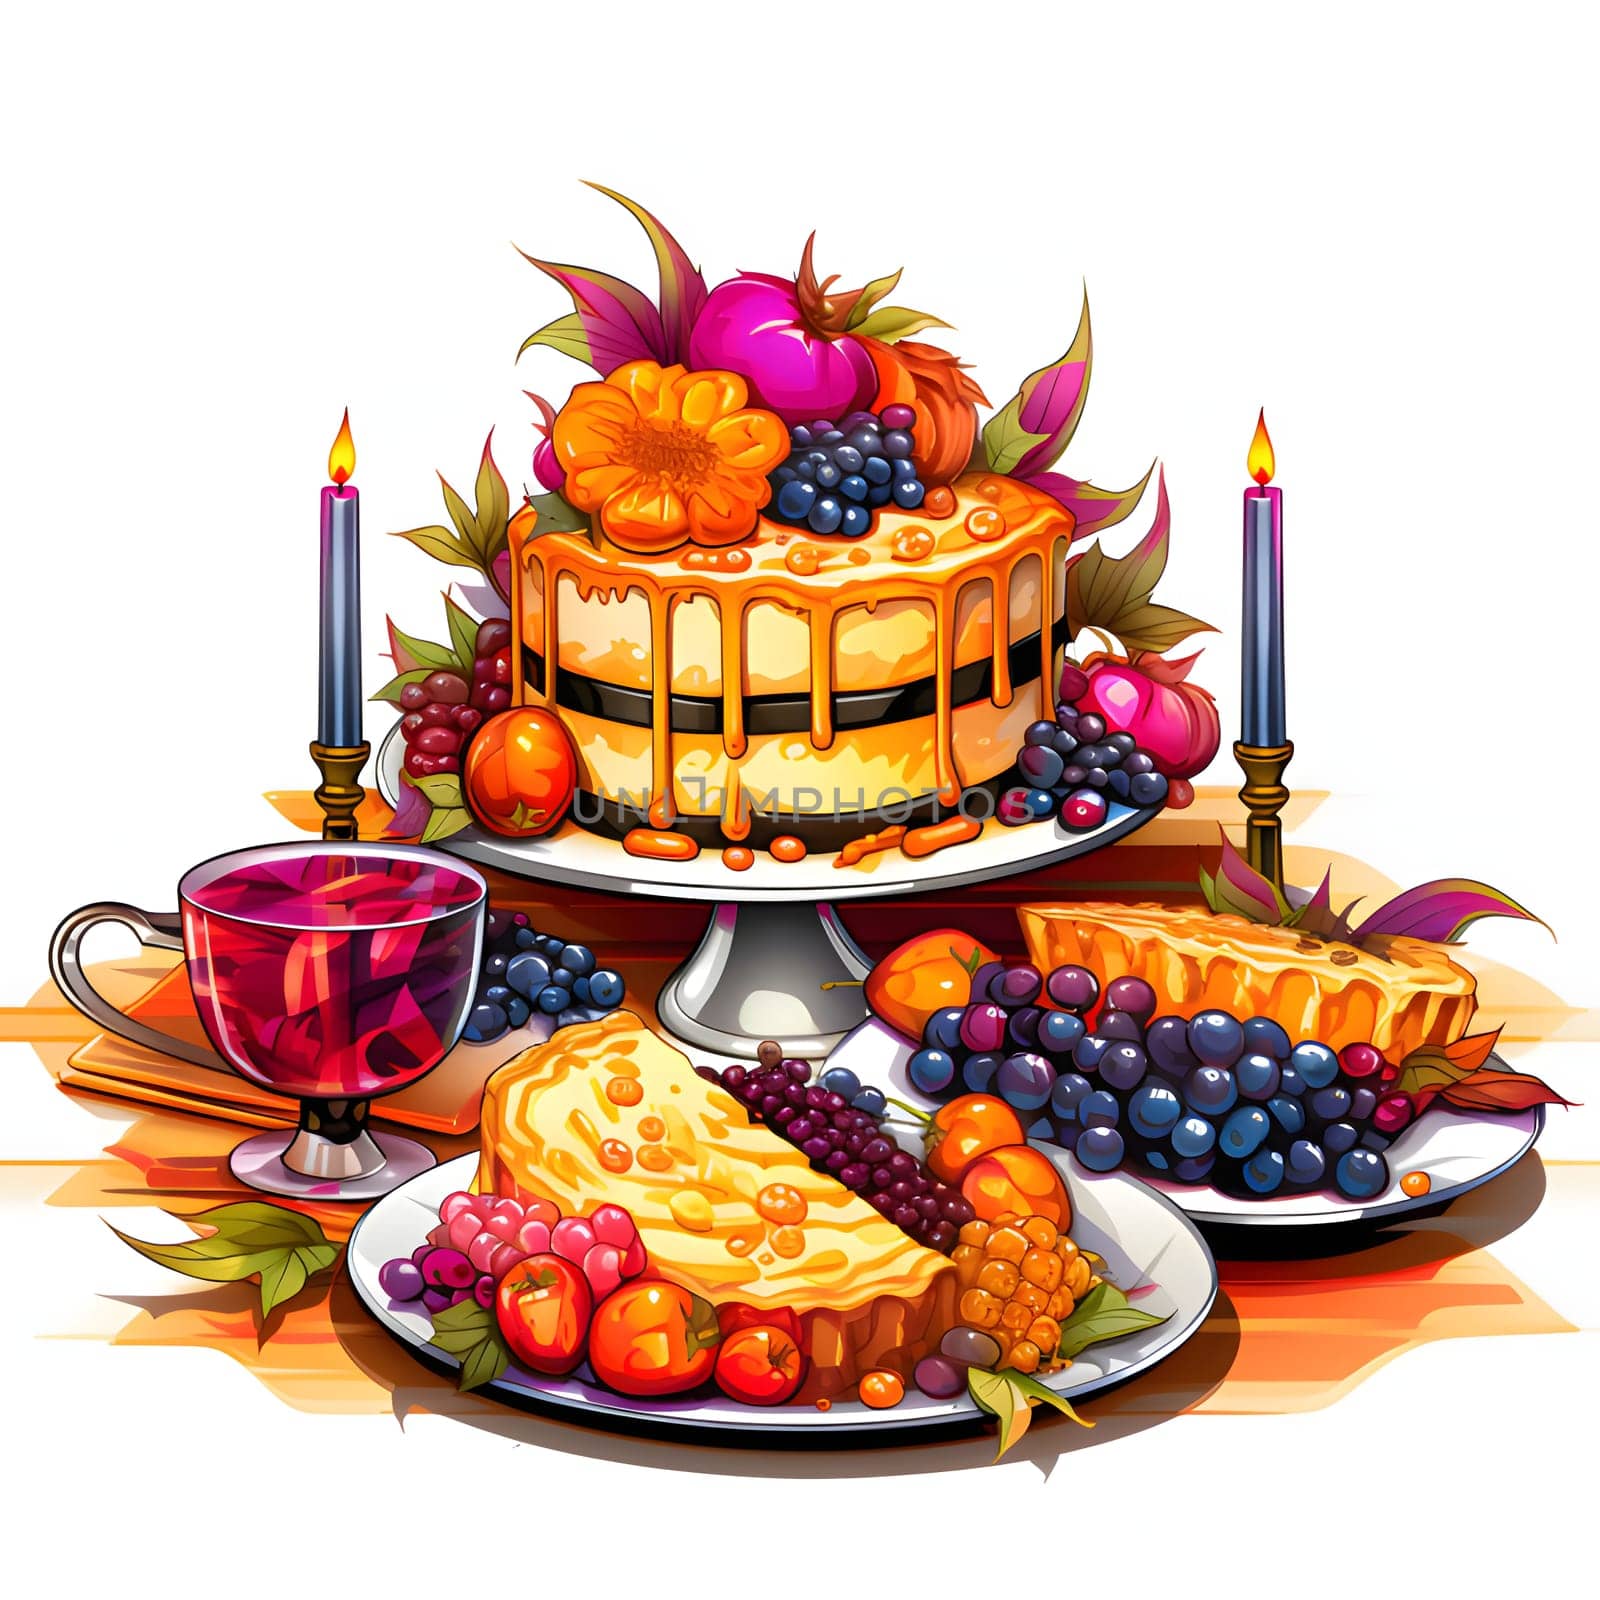 Illustration of colorful pumpkin pies grapes, vegetables, fruits, candles. Pumpkin as a dish of thanksgiving for the harvest, picture on a white isolated background. An atmosphere of joy and celebration.